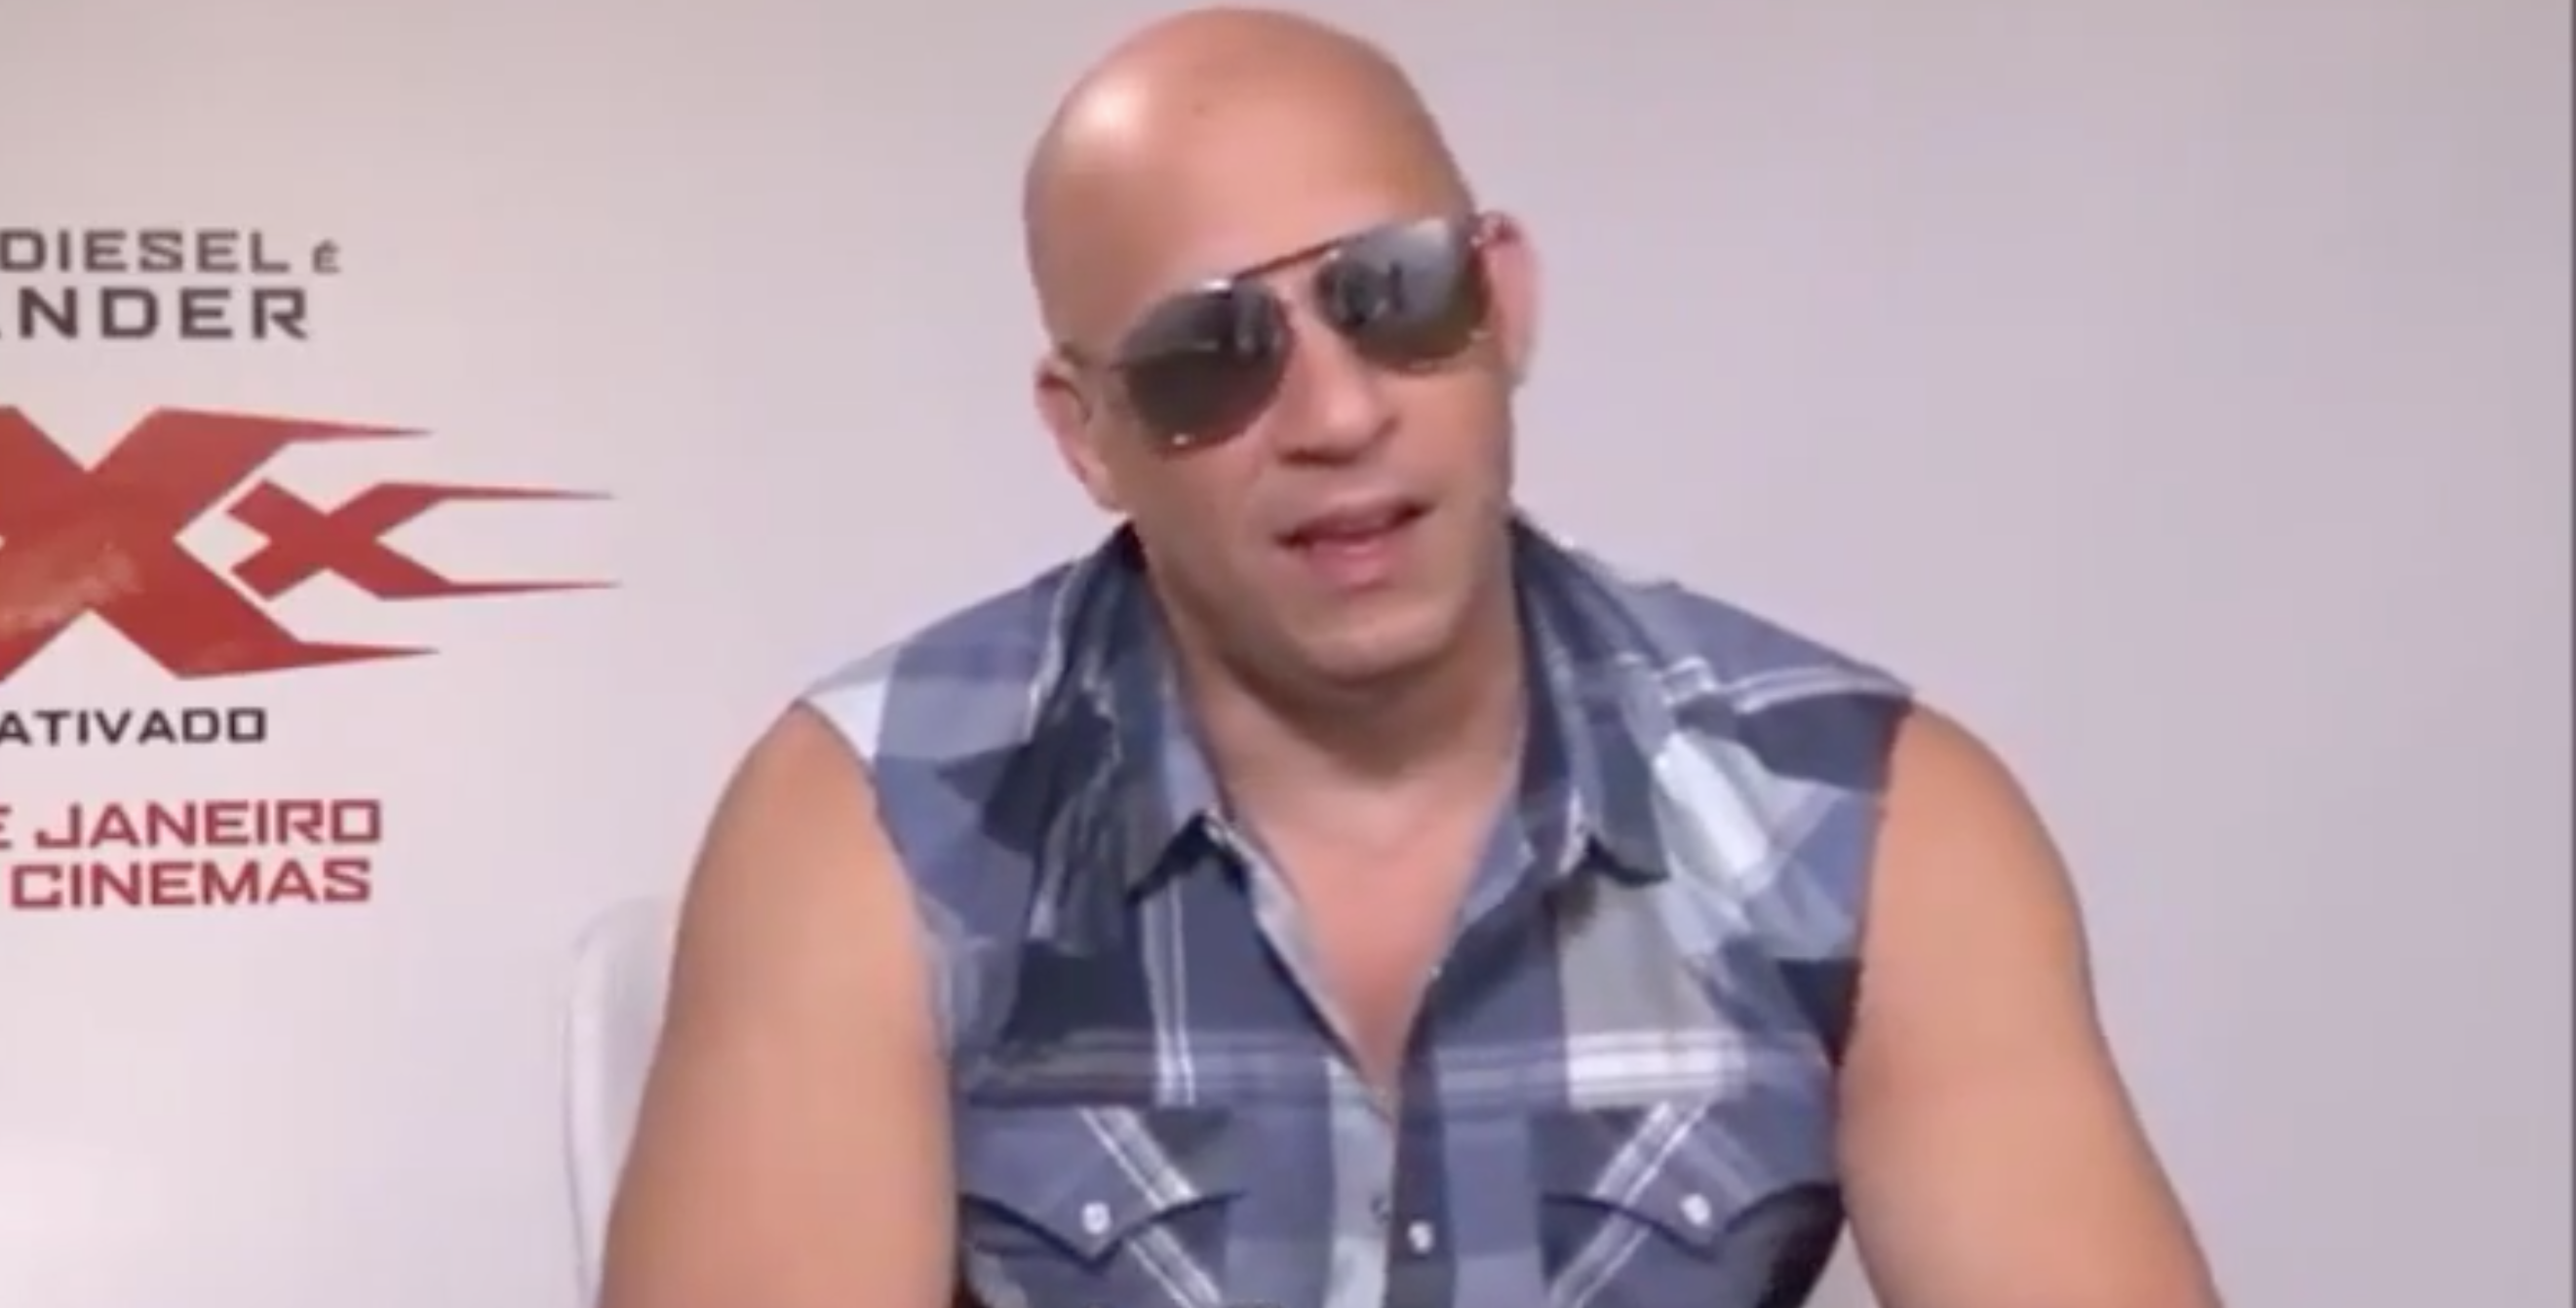 Q vin diesel ALL NEWS IMAGES VIDEOS SHOPPING Vin Diesel American actor  Overview Movies News Interviev